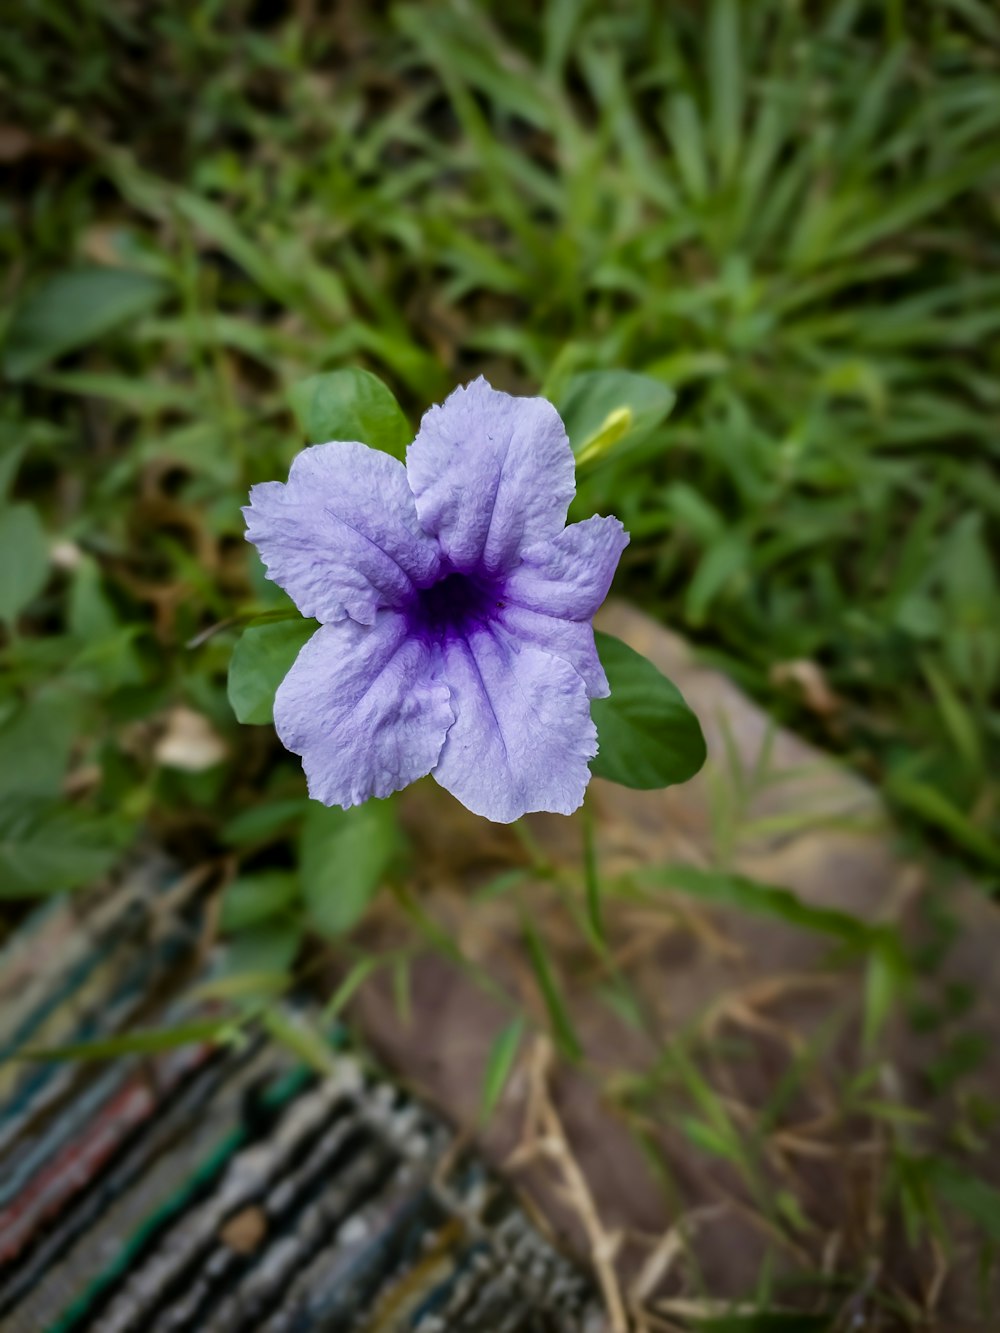 a purple flower sitting on top of a lush green field